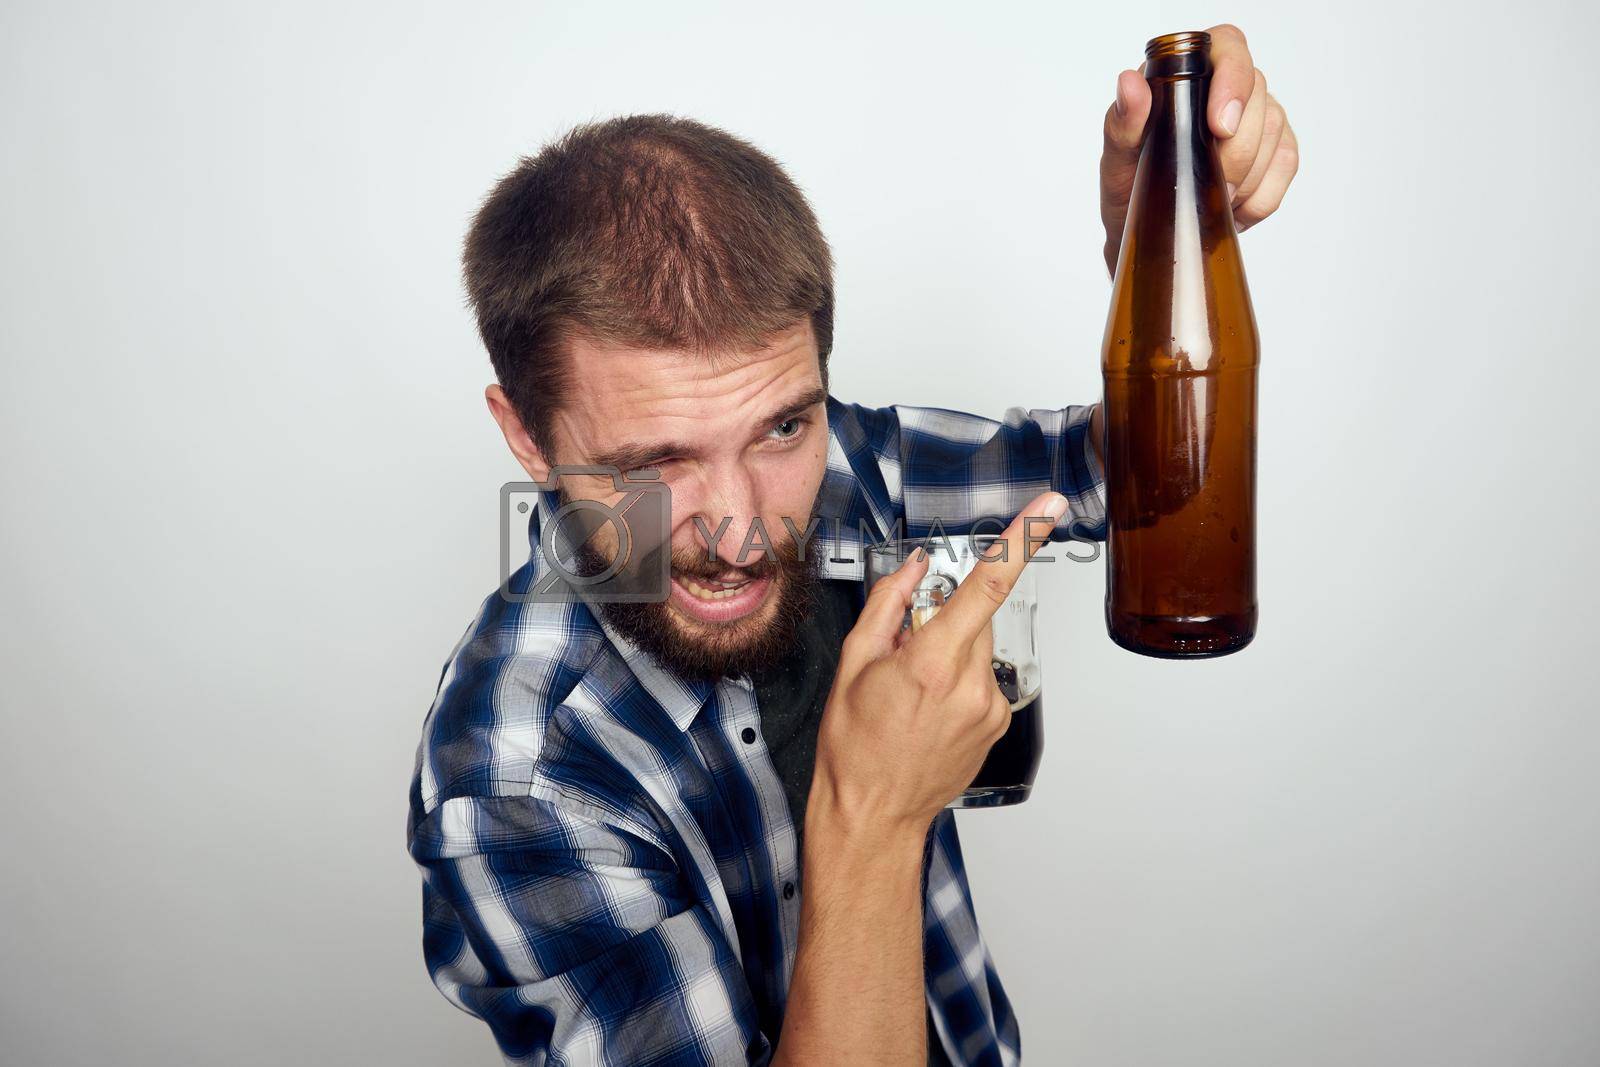 Royalty free image of drunk man alcoholism problems emotions depression Lifestyle by Vichizh